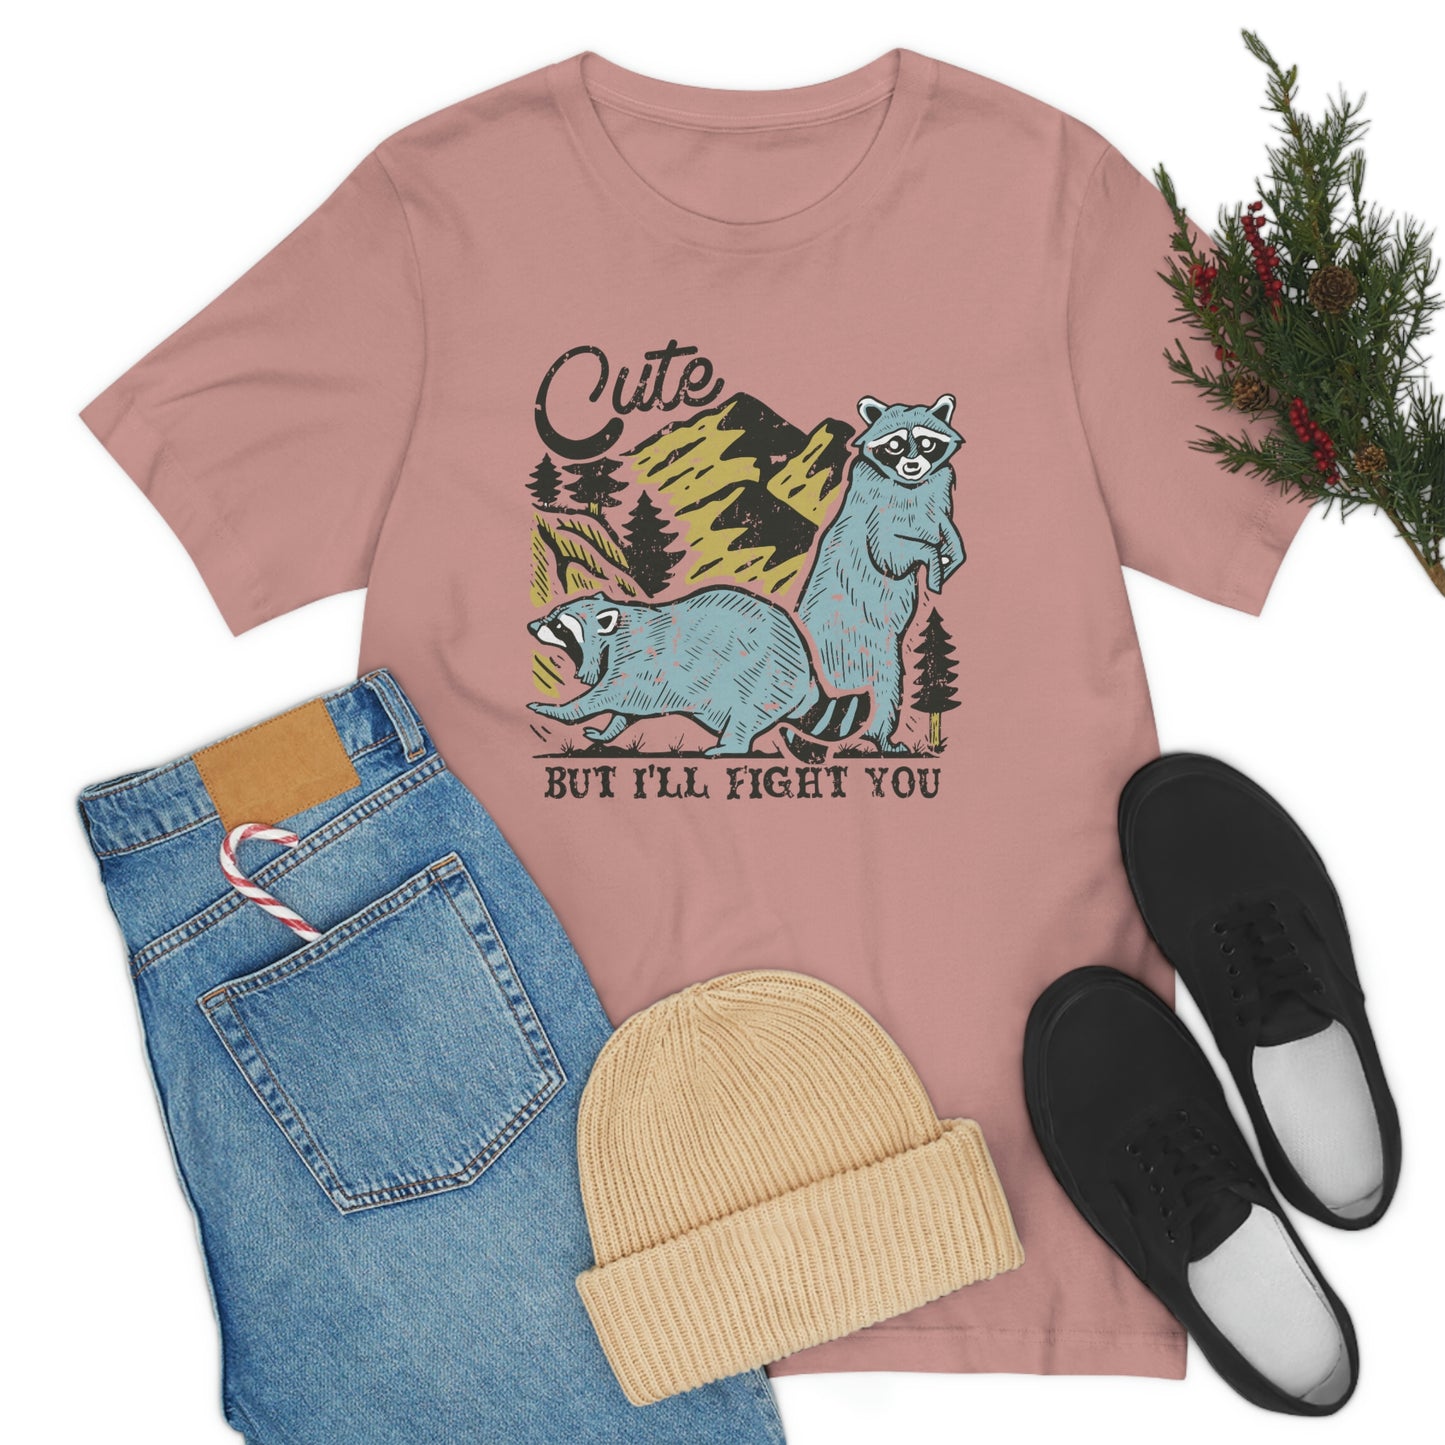 "Cute, but I'll fight you" Bella Canvas Unisex Jersey Short Sleeve Tee